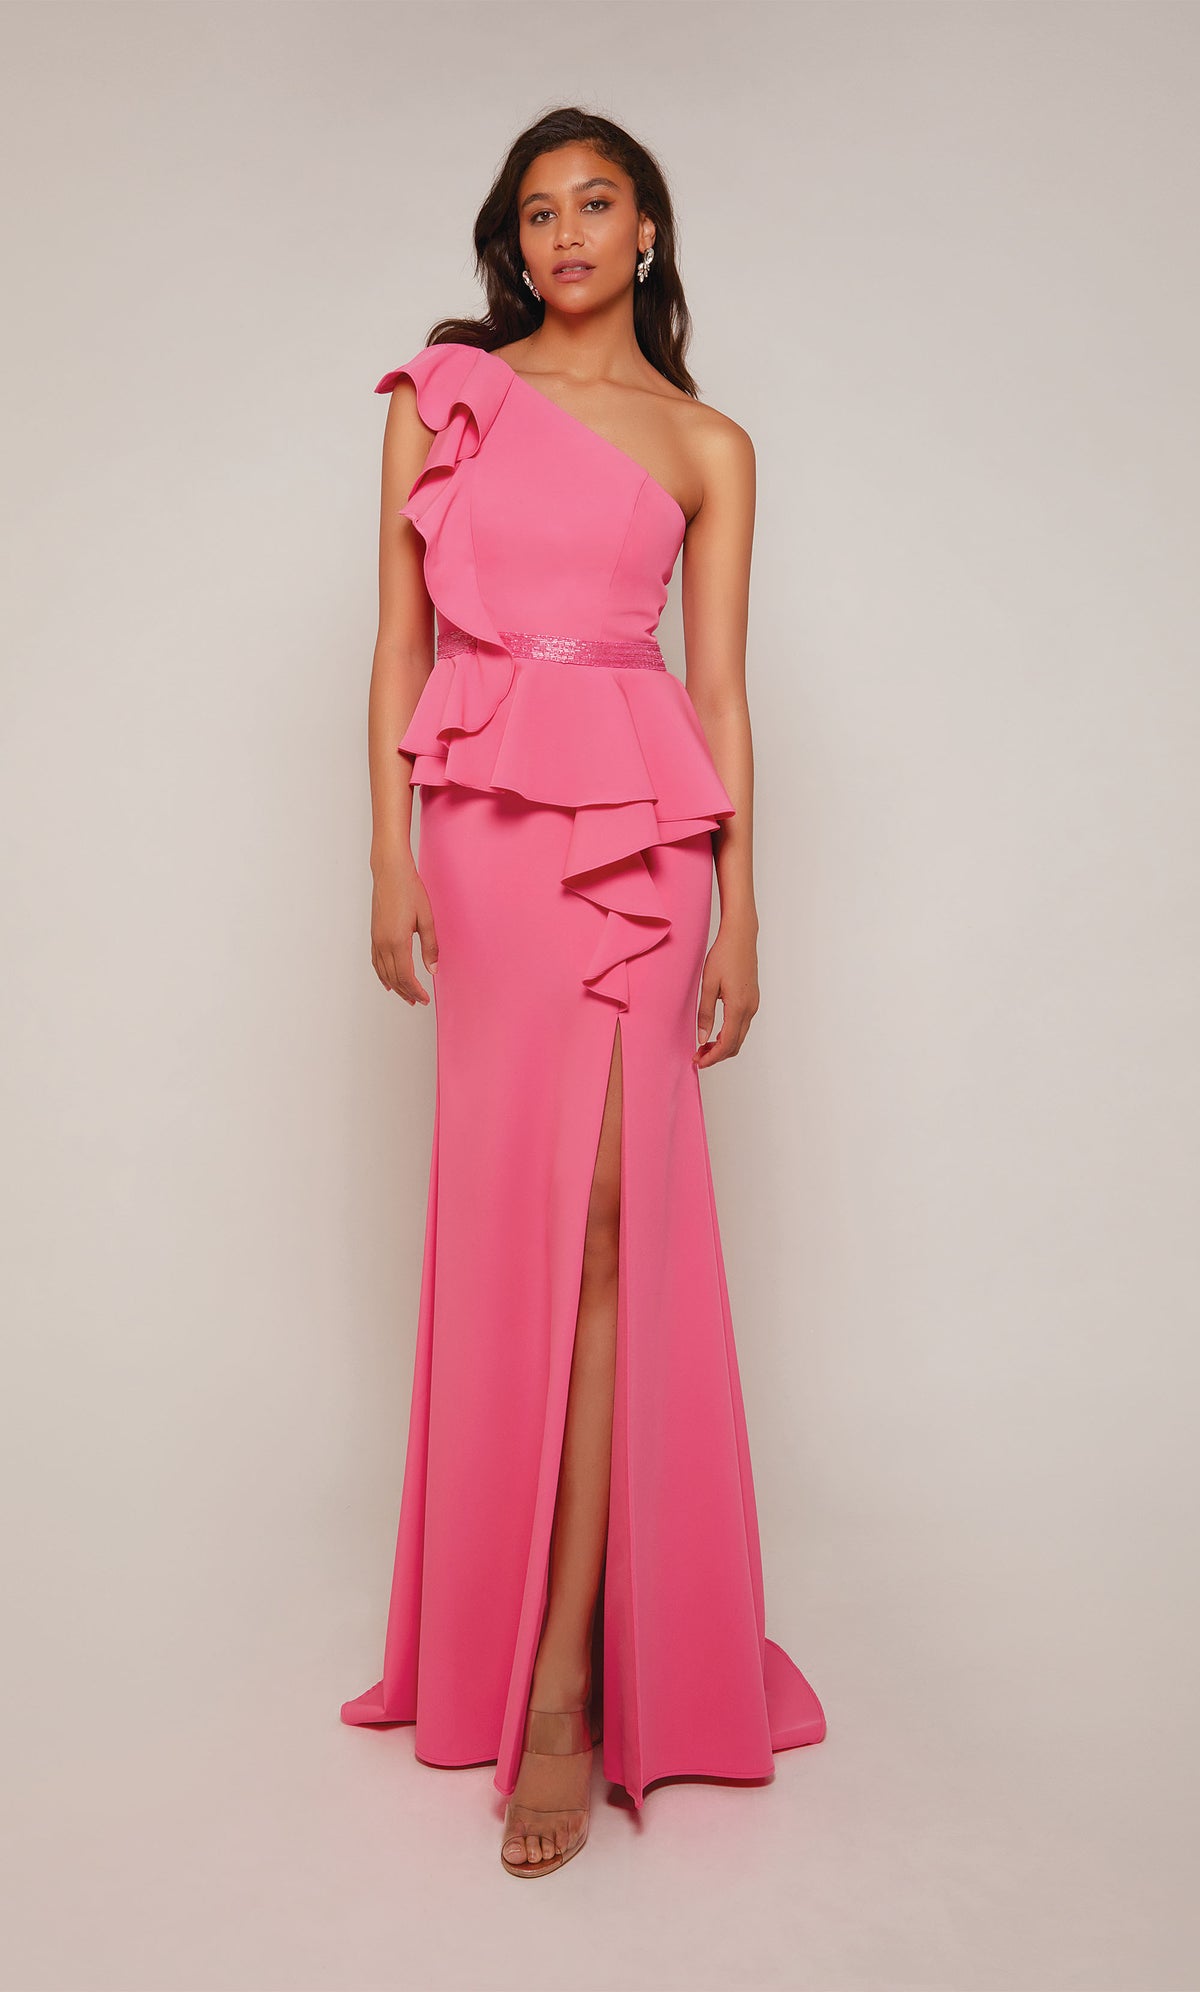 Bubblegum pink. one shoulder peplum dress with ruffle detail, faux beaded belt, and side slit.